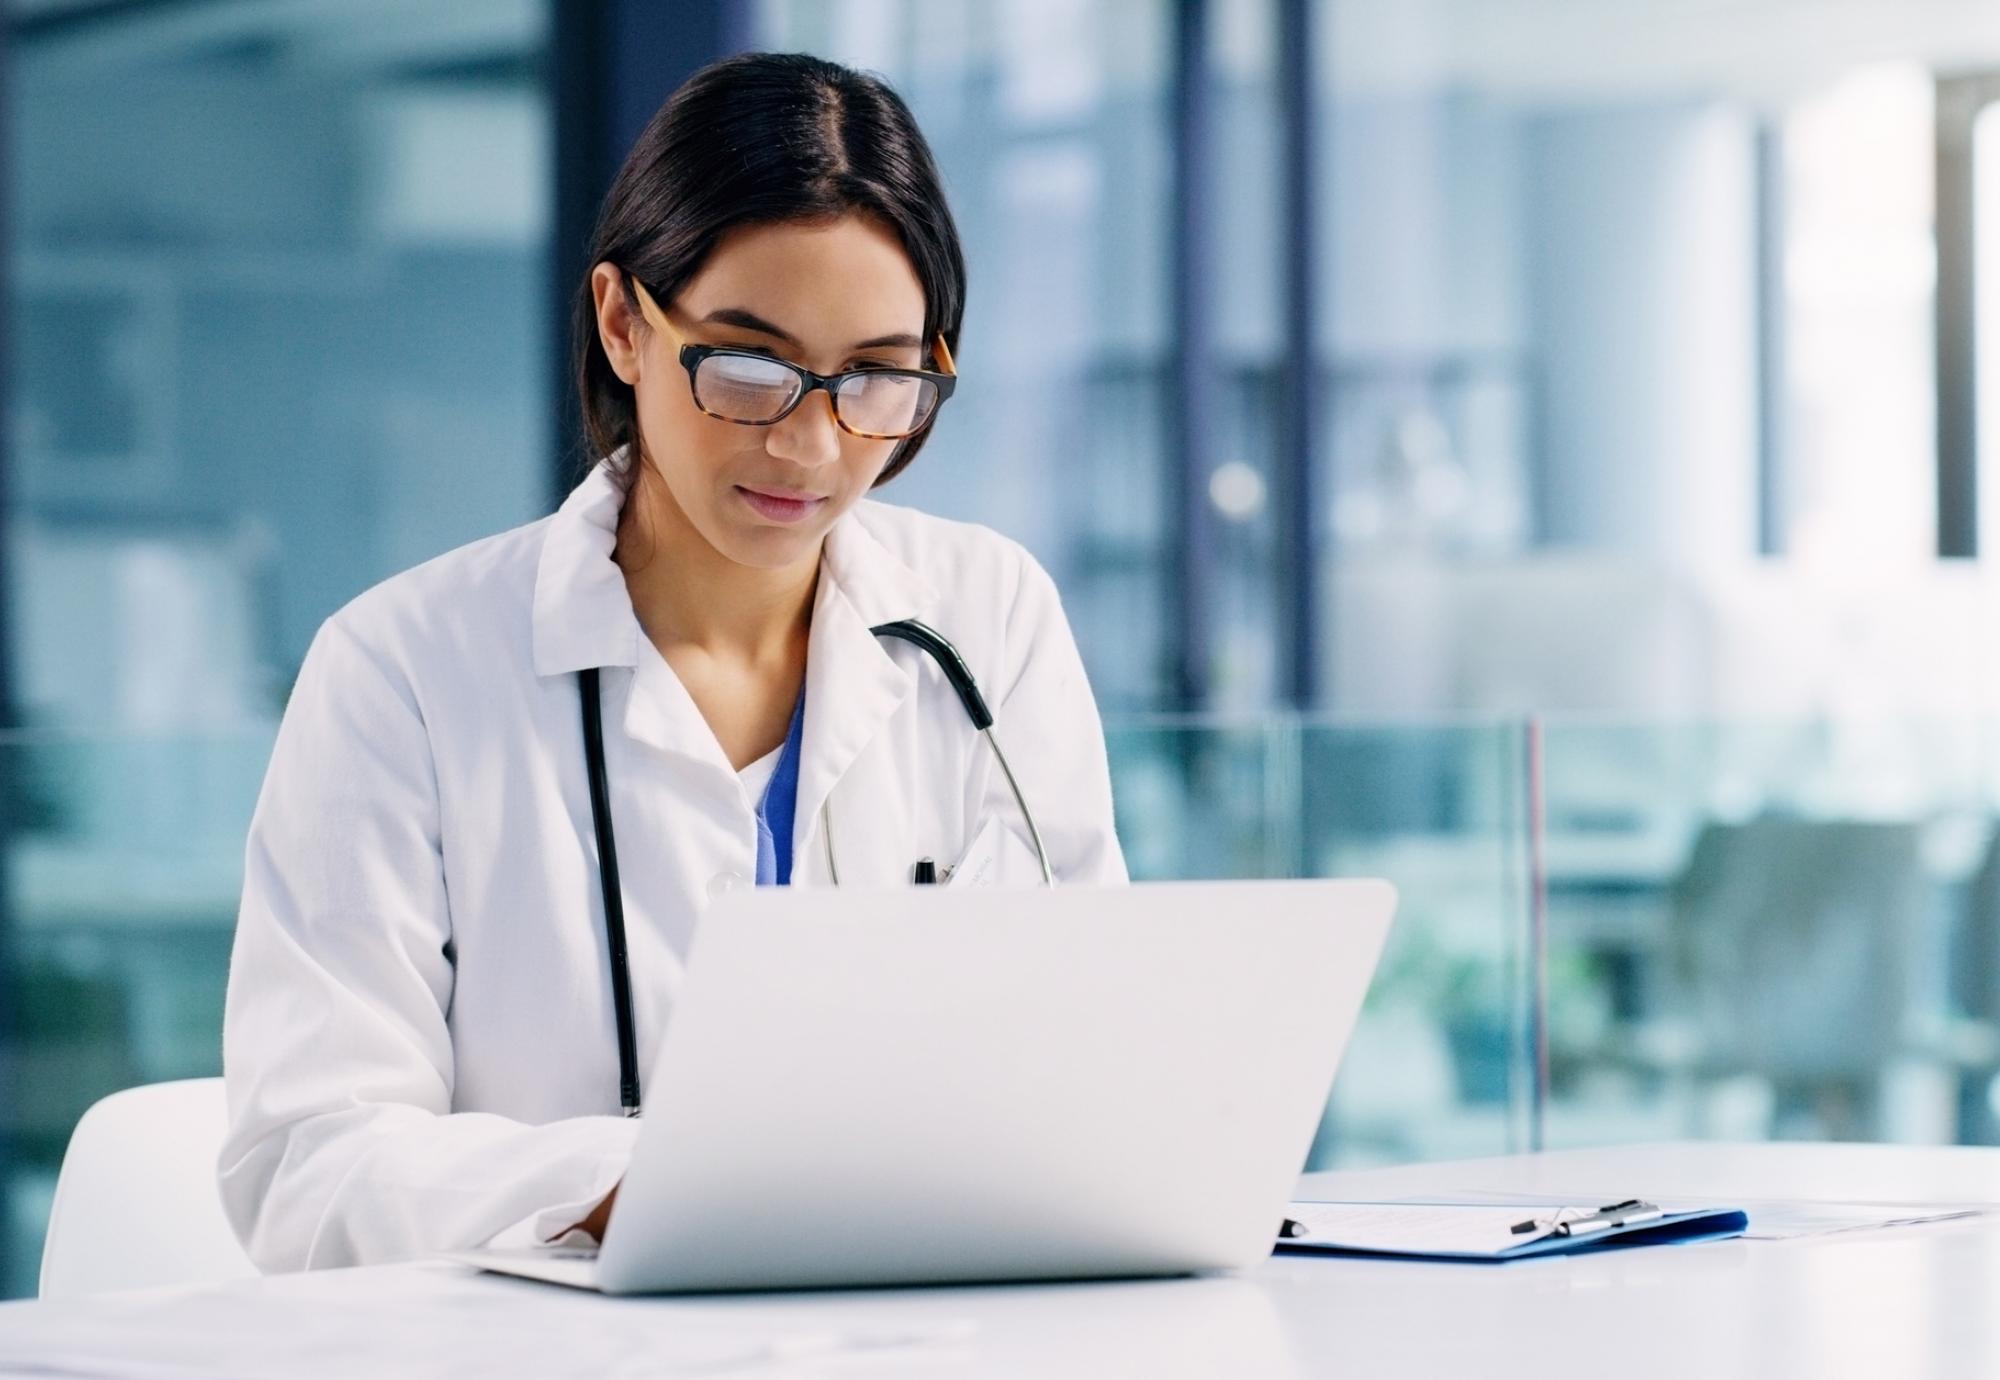 Female doctor looks at medical records on laptop.